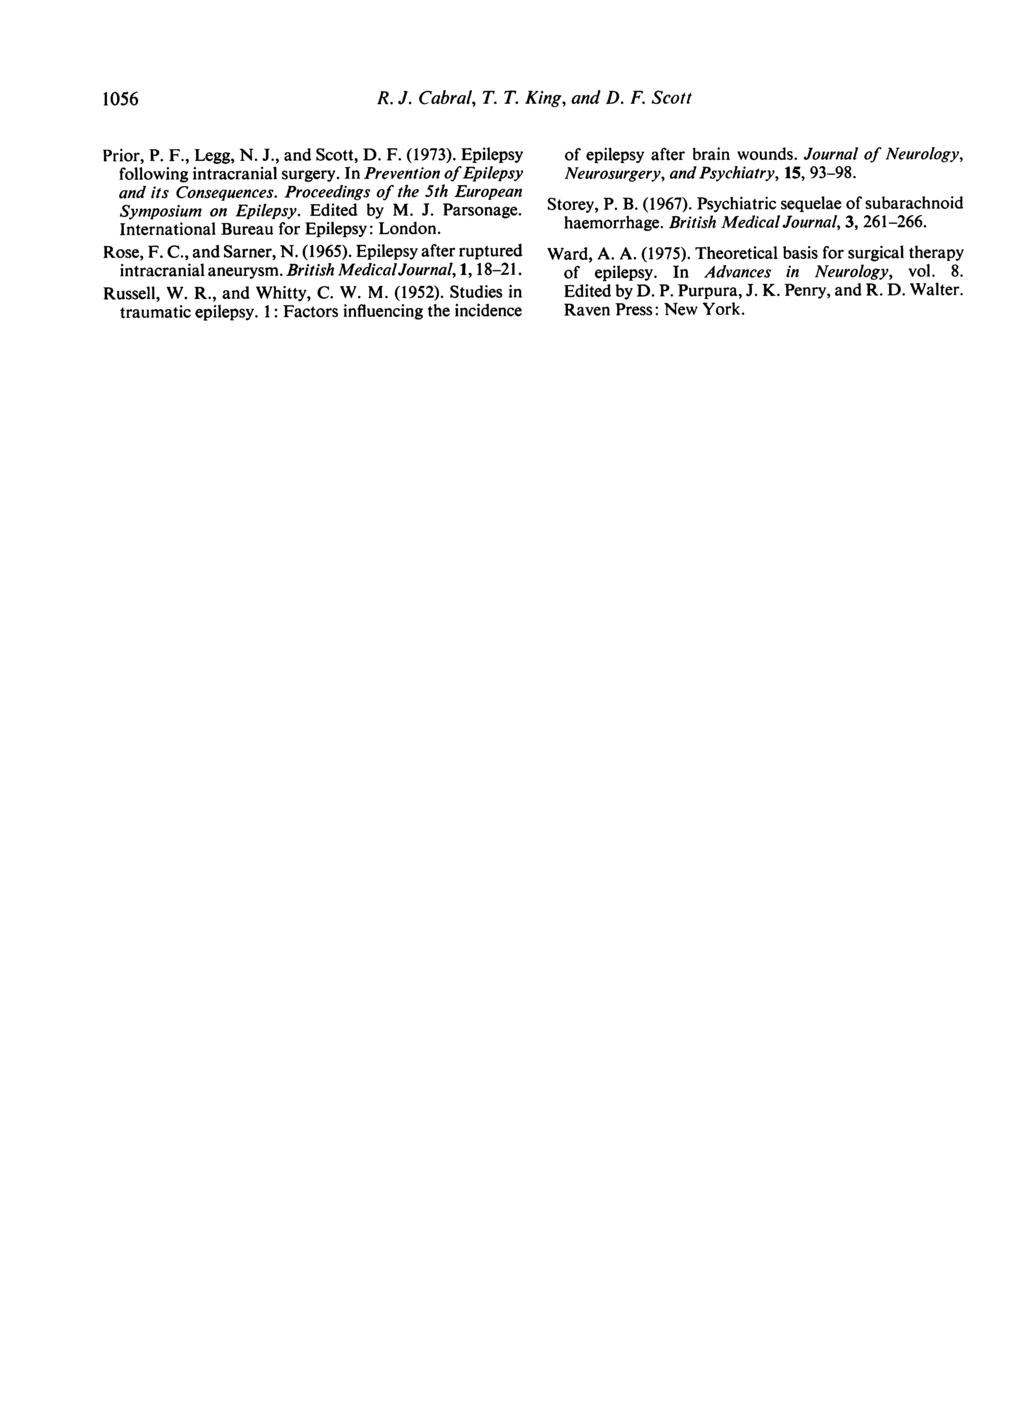 1056 Prior, P. F., Legg, N. J., and Scott, D. F. (1973). Epilepsy following intracranial surgery. In Prevention ofepilepsy and its Consequences. Proceedings of the 5th European Symposium on Epilepsy.